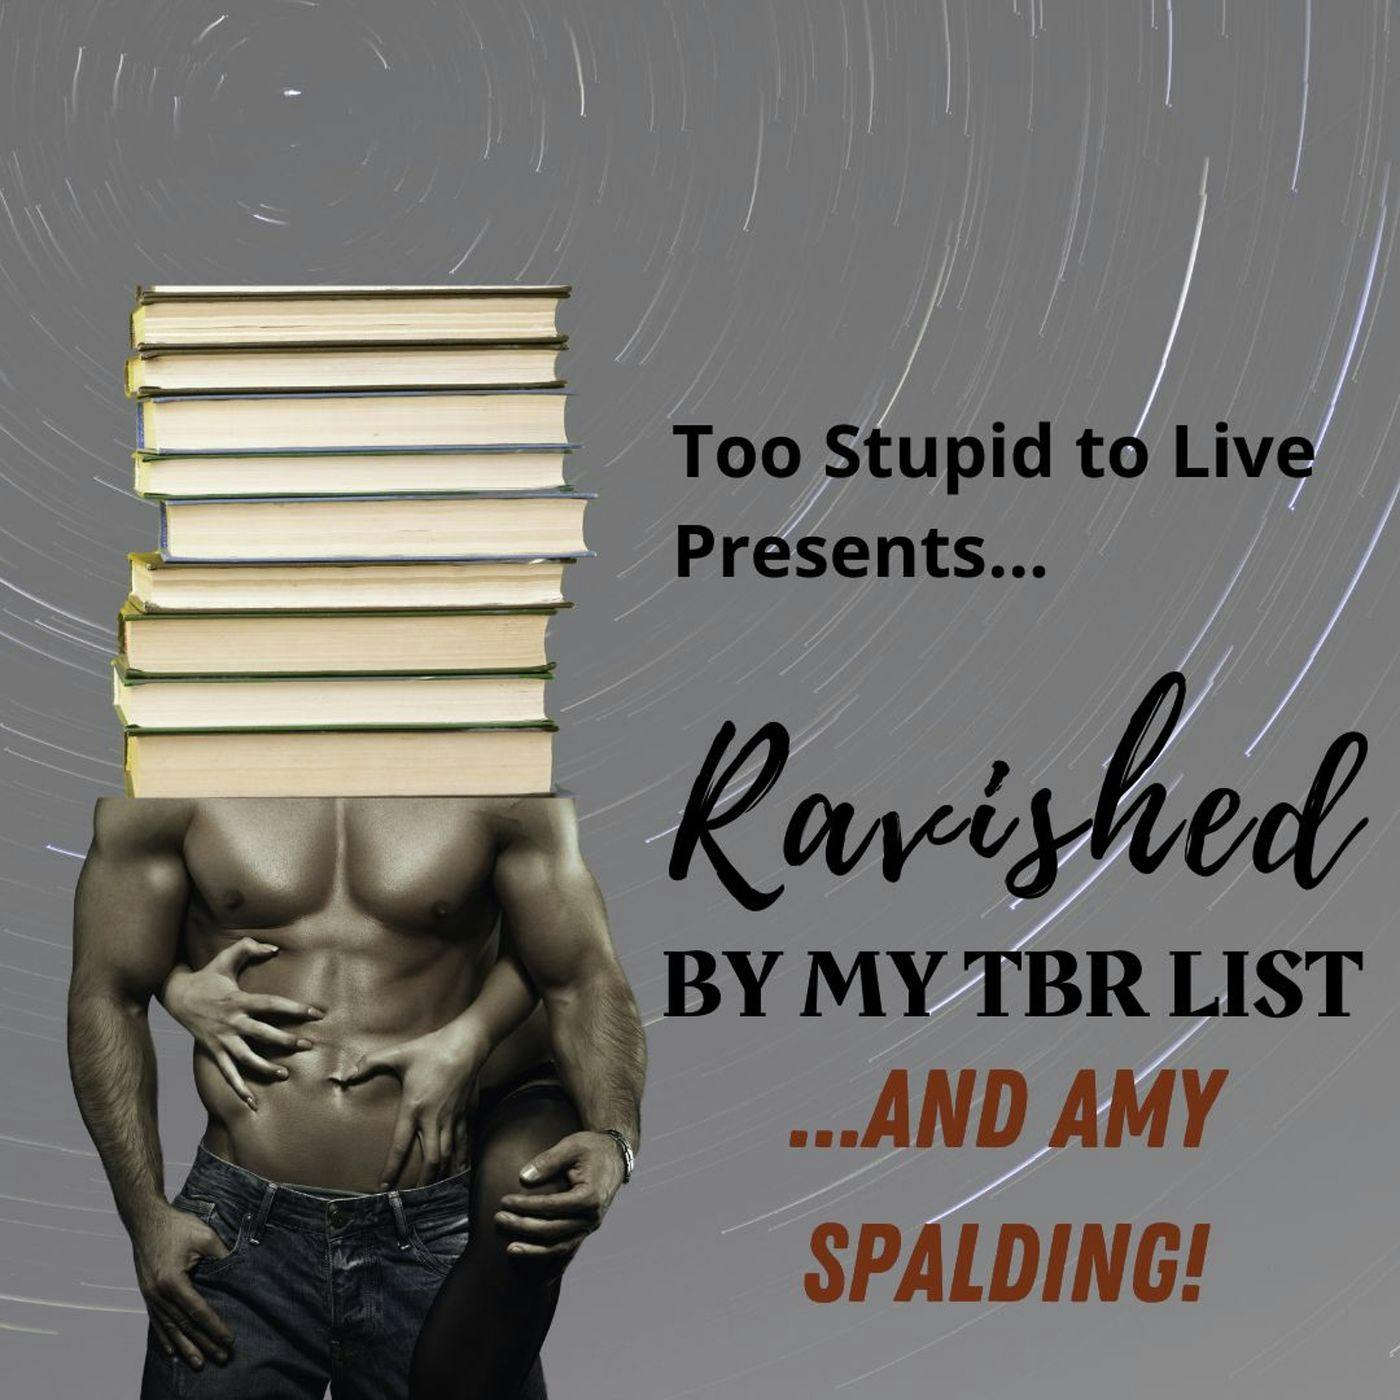 Ravished by My TBR List AND Amy Spalding!